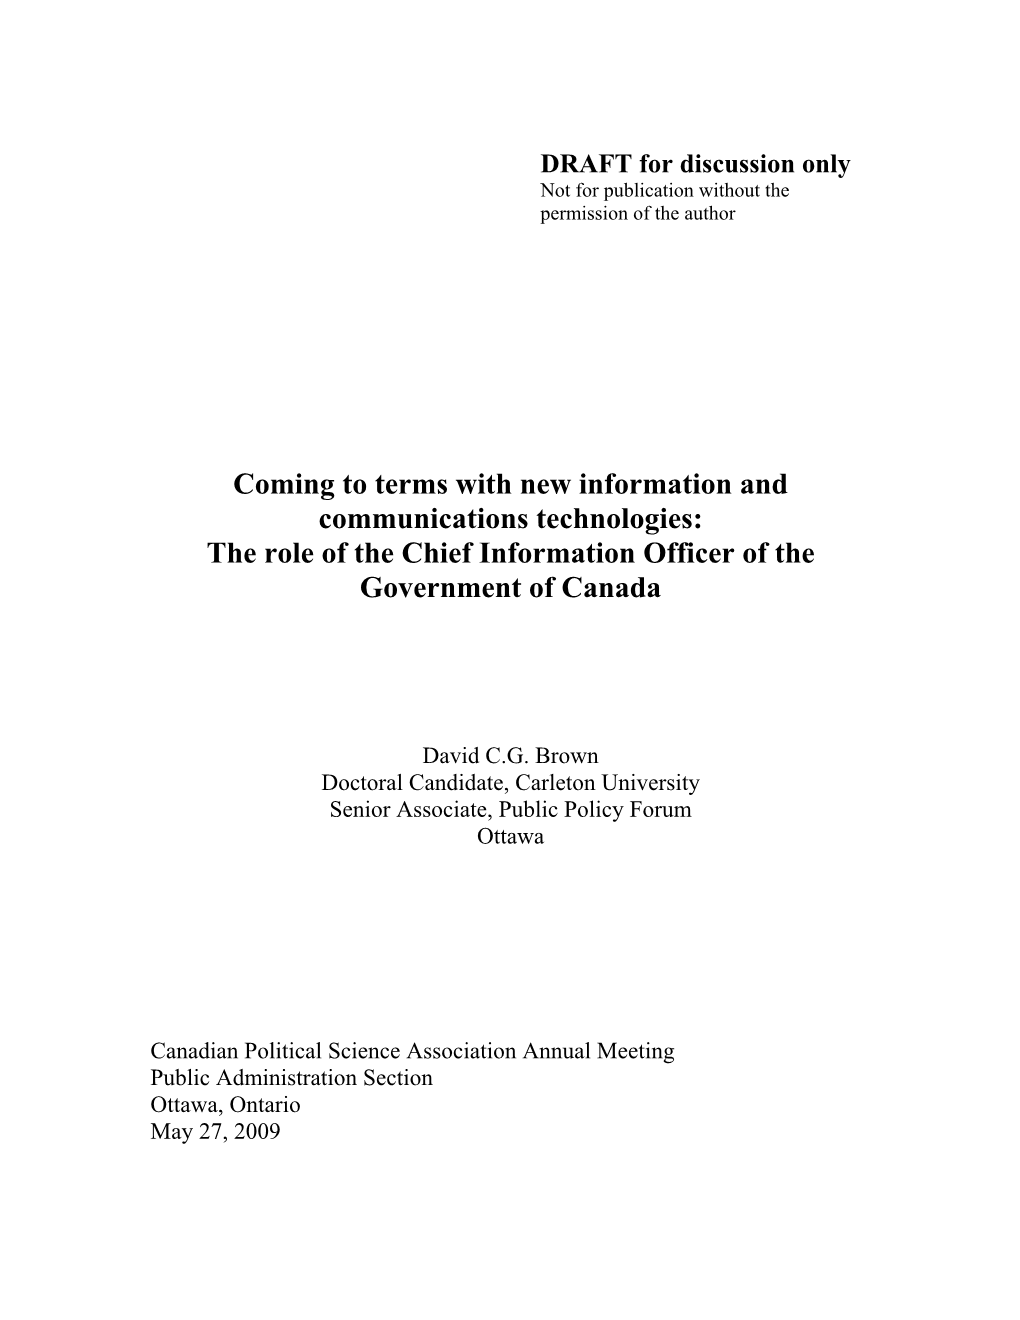 The Role of the Chief Information Officer of the Government of Canada